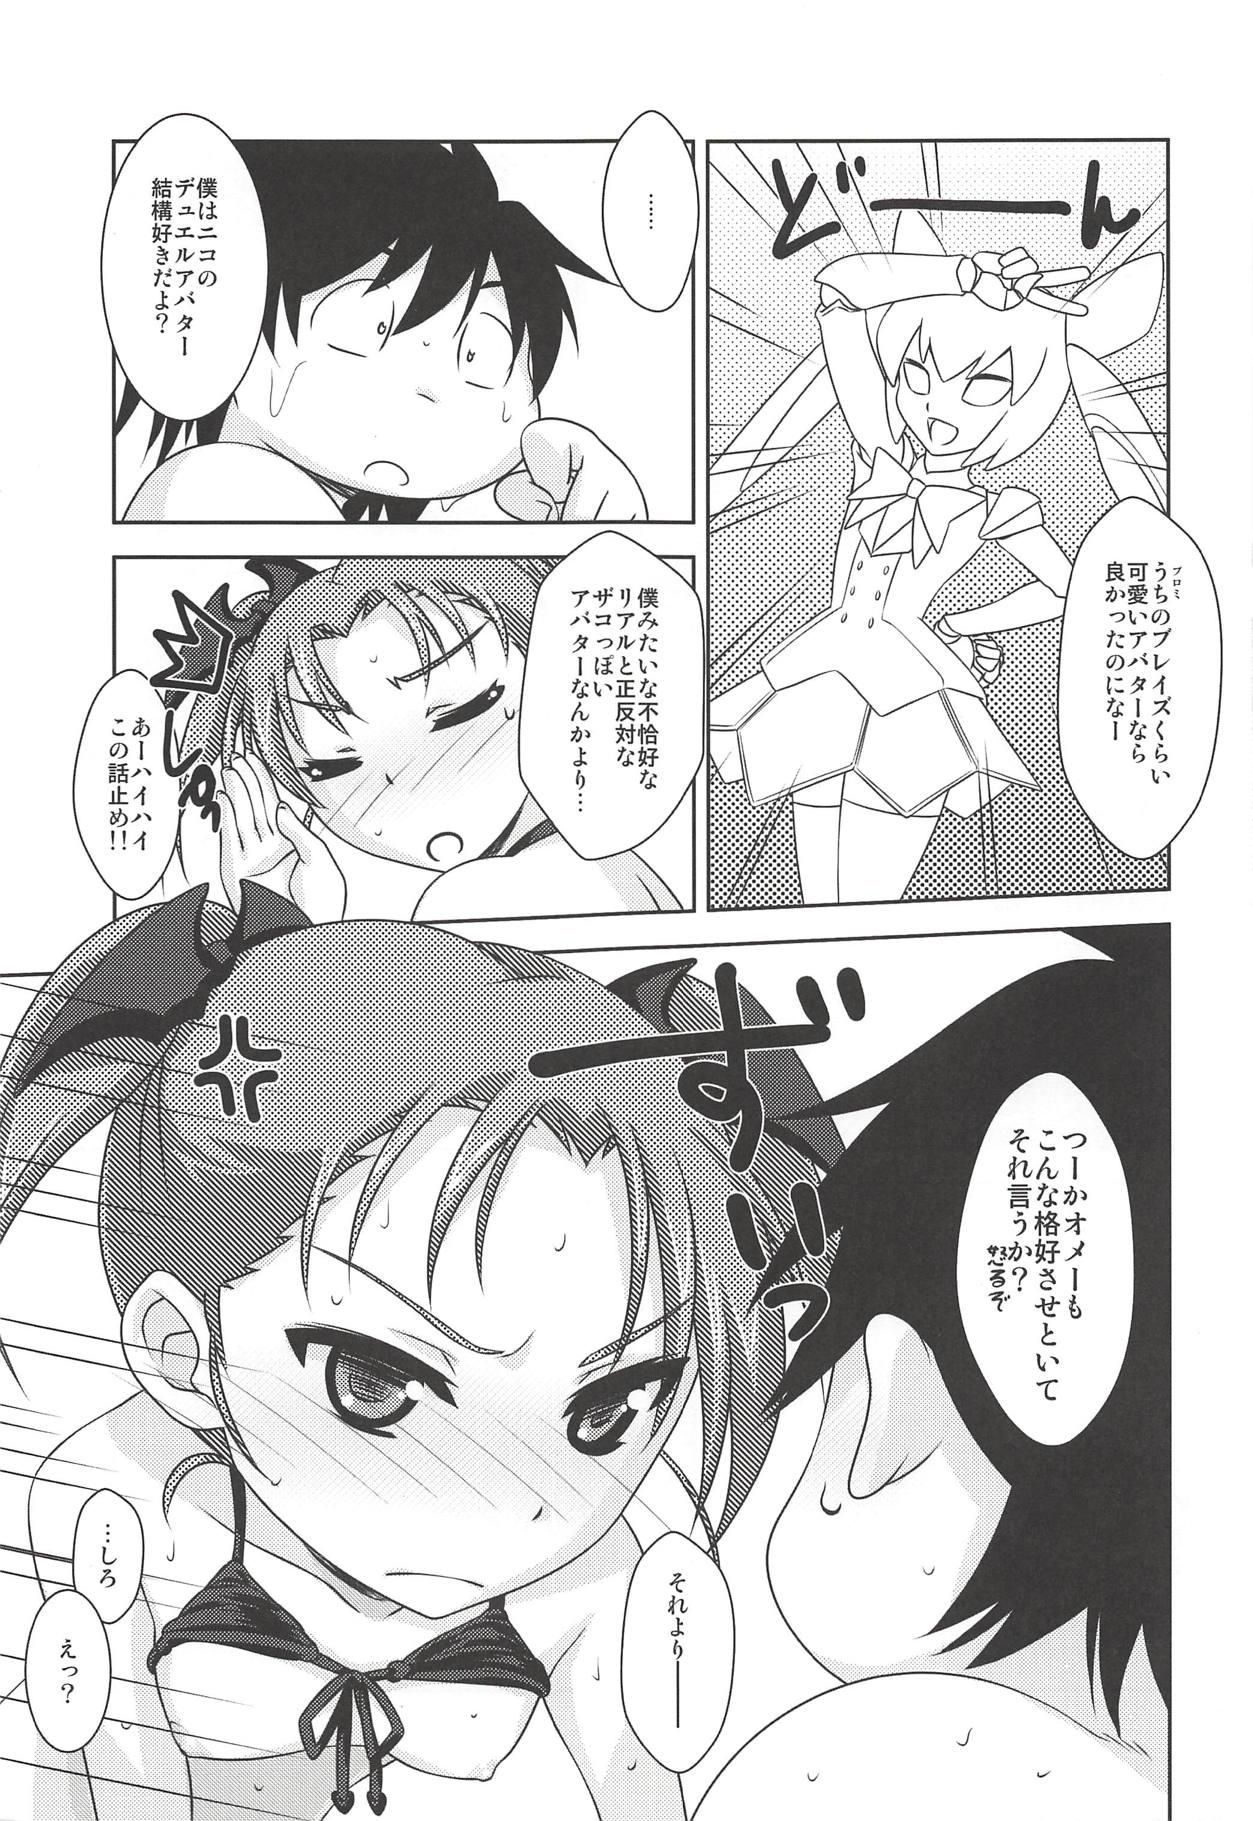 Squirting (C93) [Reds! (Aotsuki Hirotada) Houkago Link 10 (Accel World) - Accel world Cowgirl - Page 6